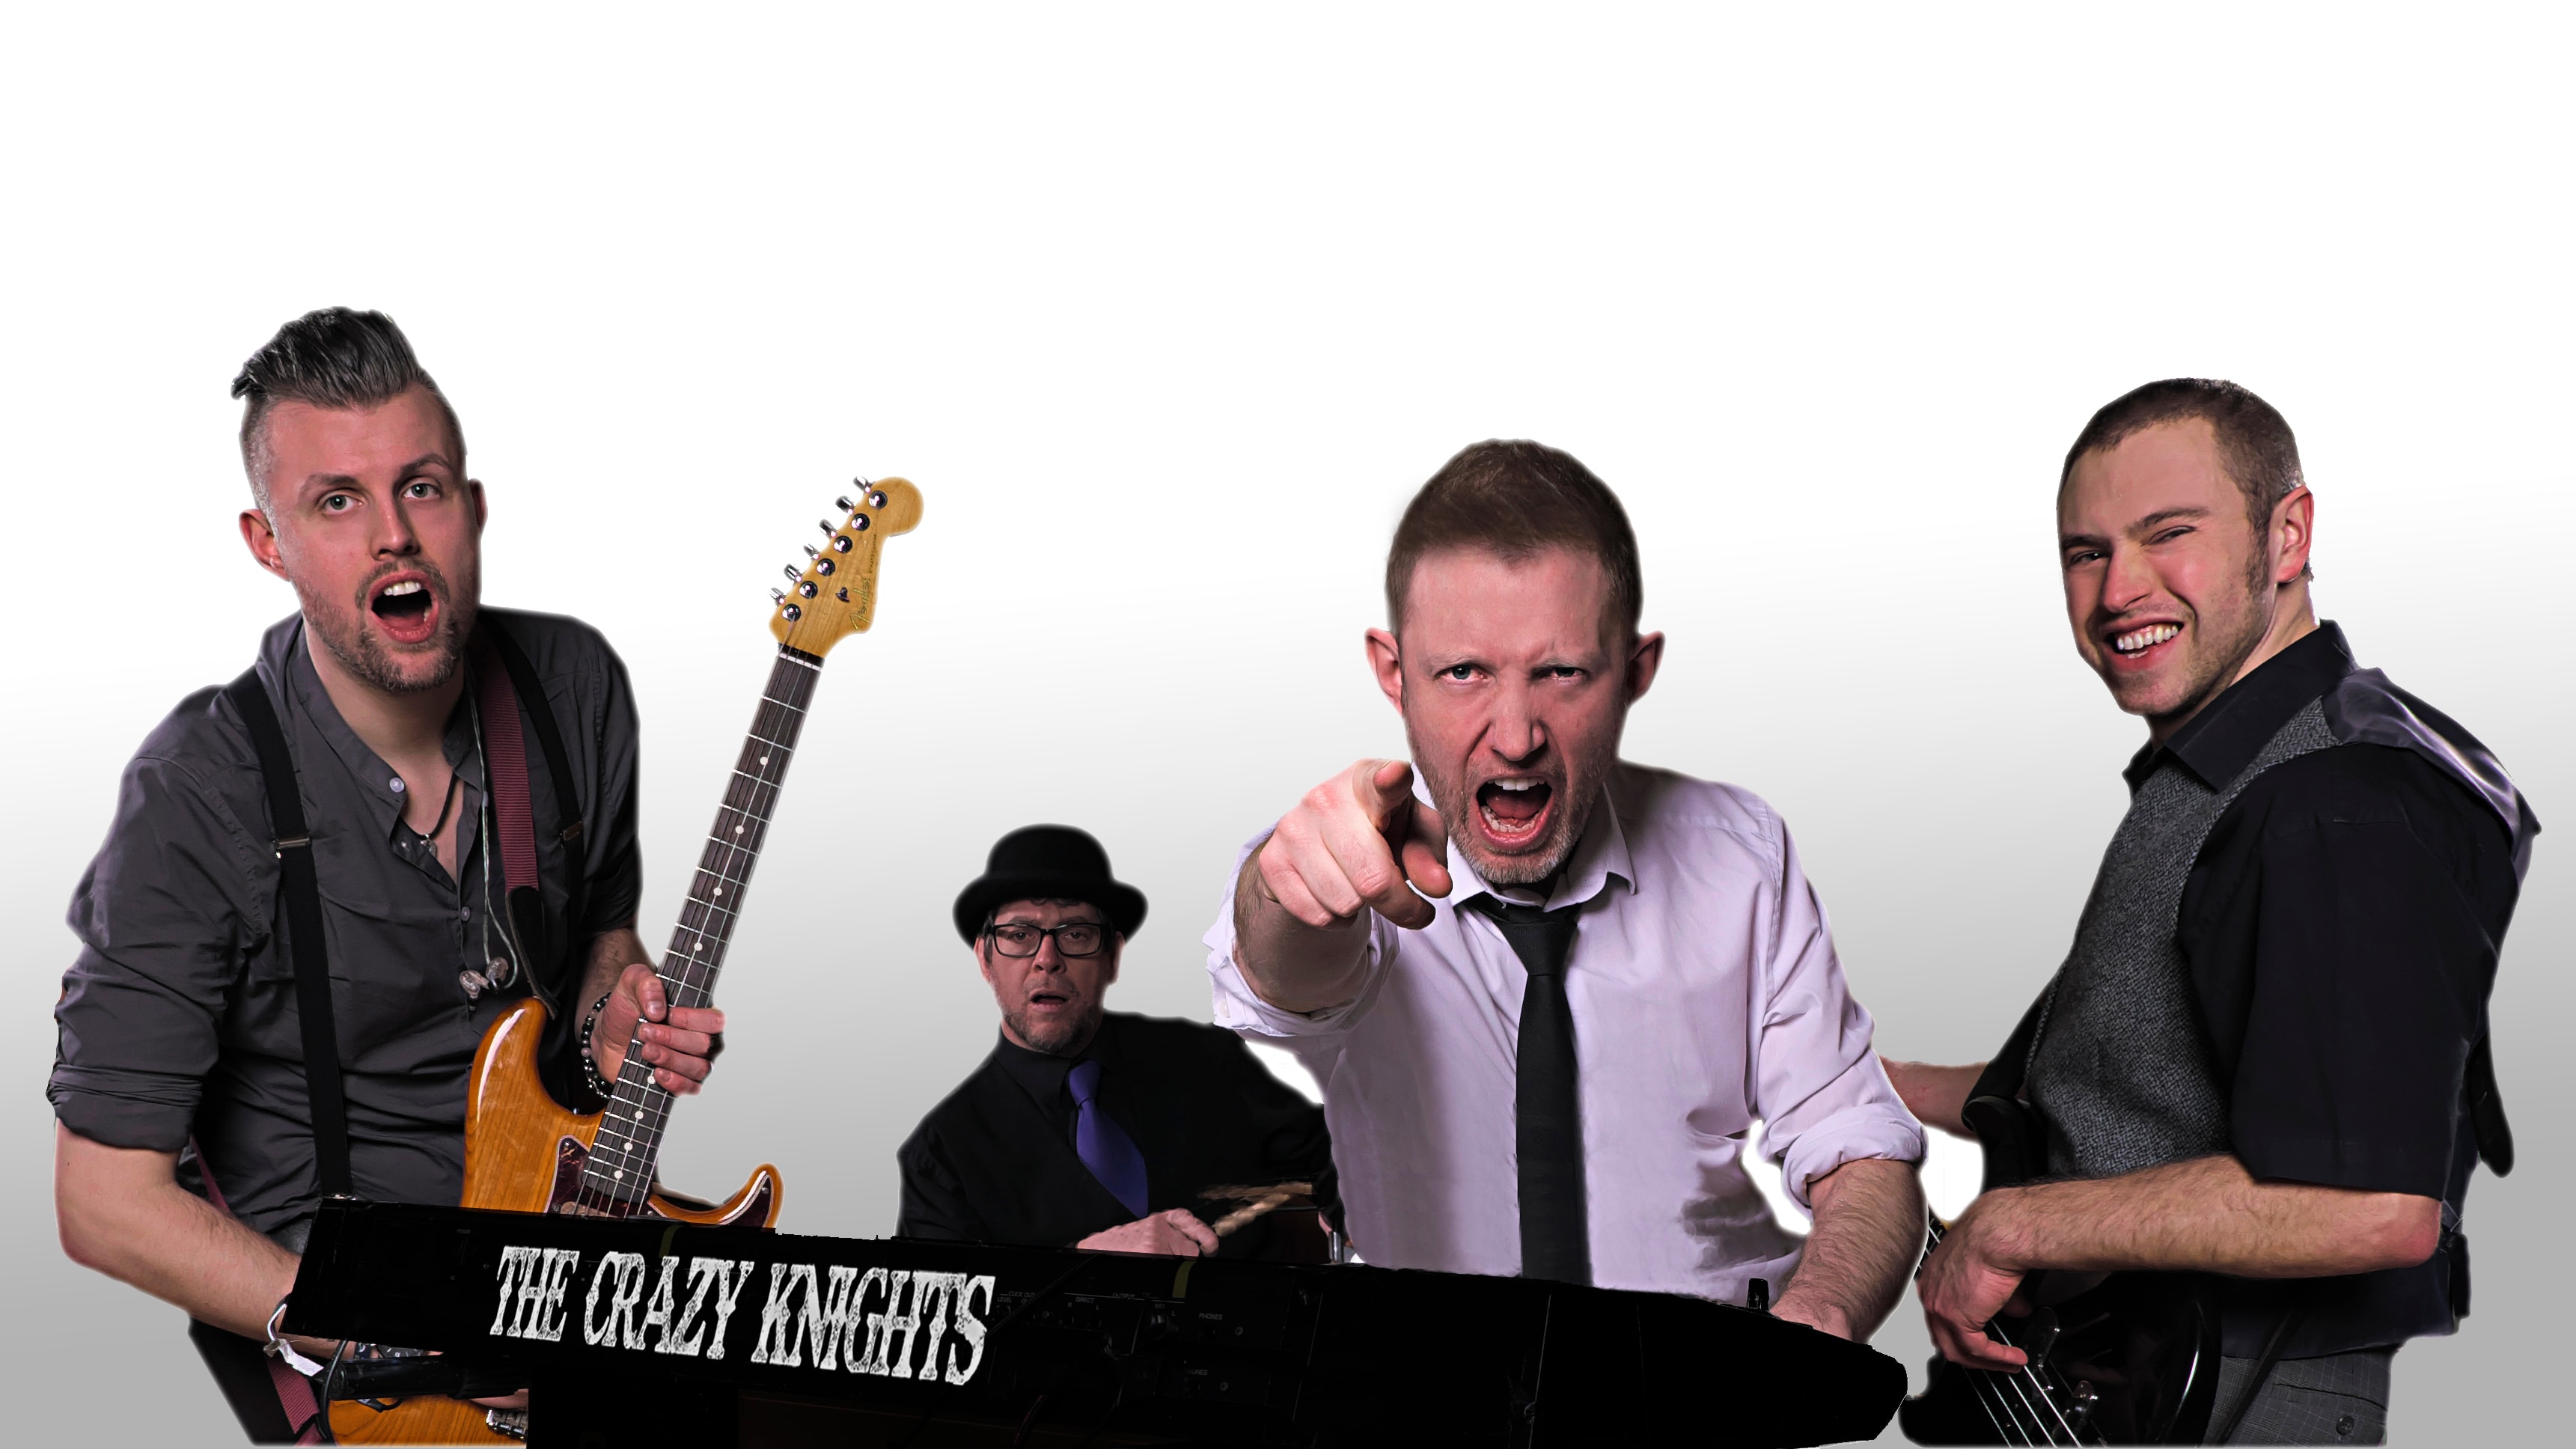 The Crazy Knights 4 piece Band Perform Greatest Hits of the Past 50 Years